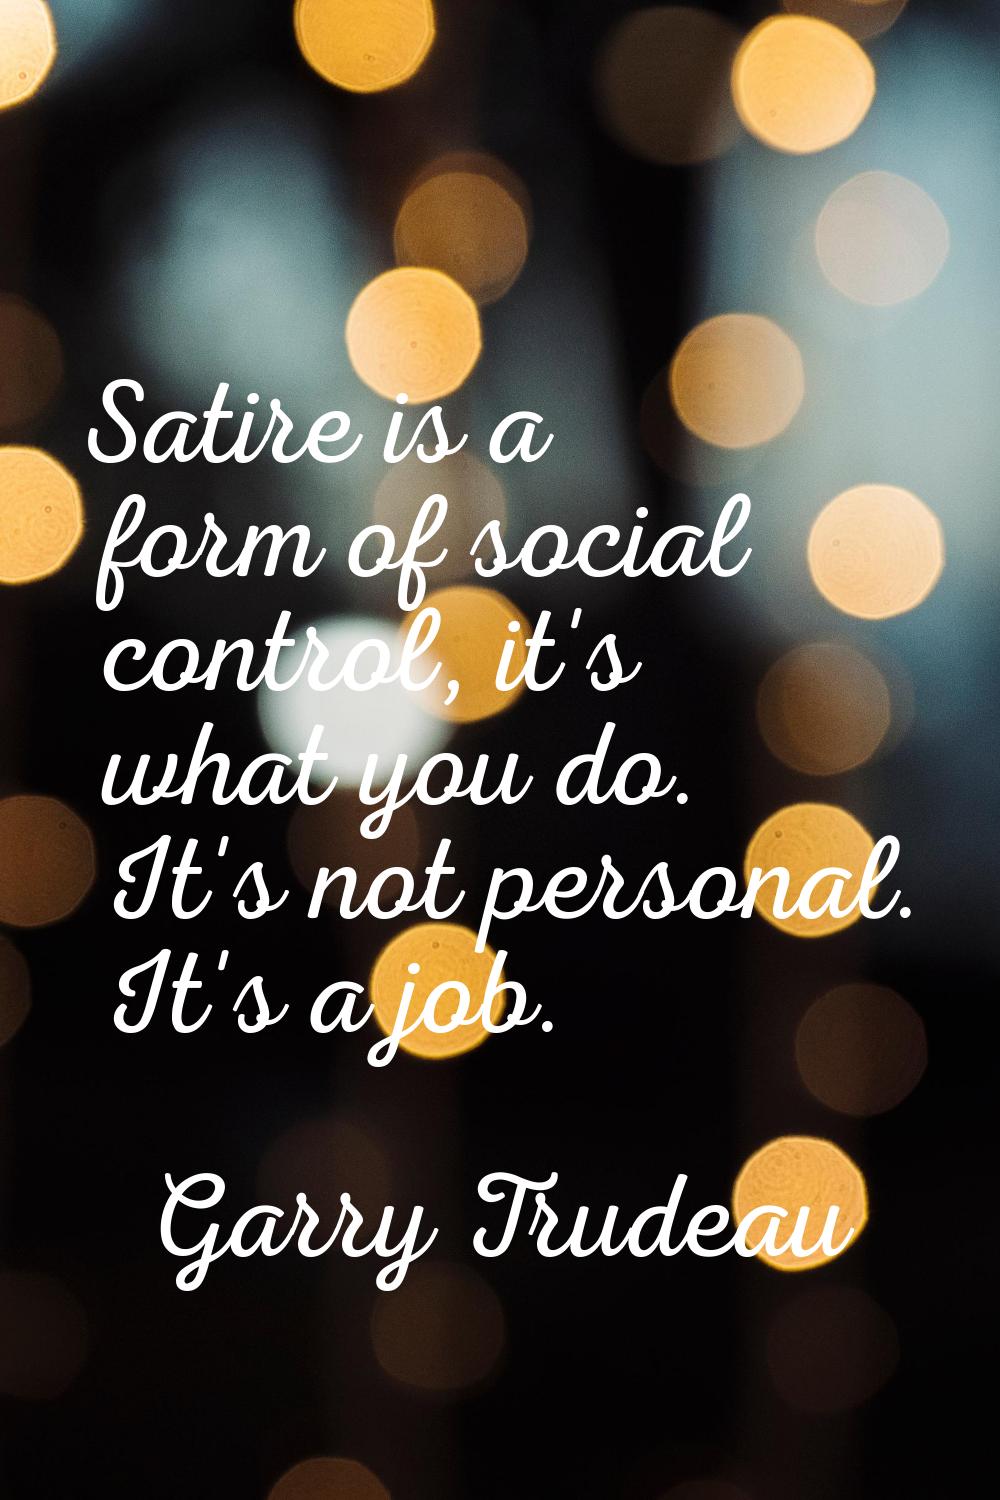 Satire is a form of social control, it's what you do. It's not personal. It's a job.